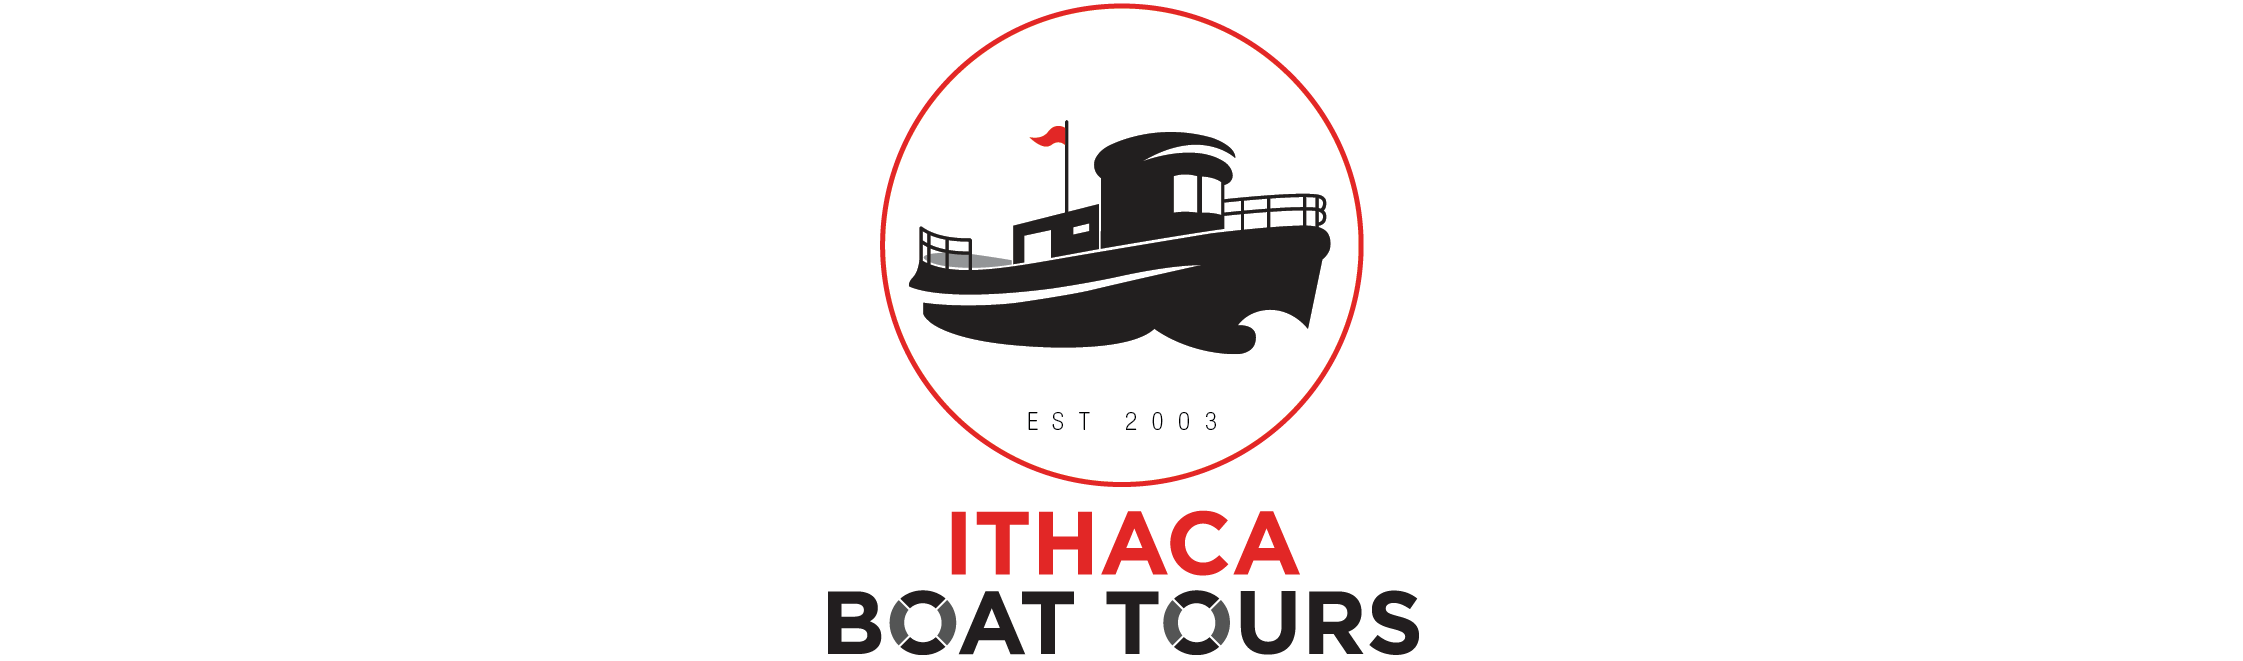 Ithacaboattours_logo_header-12